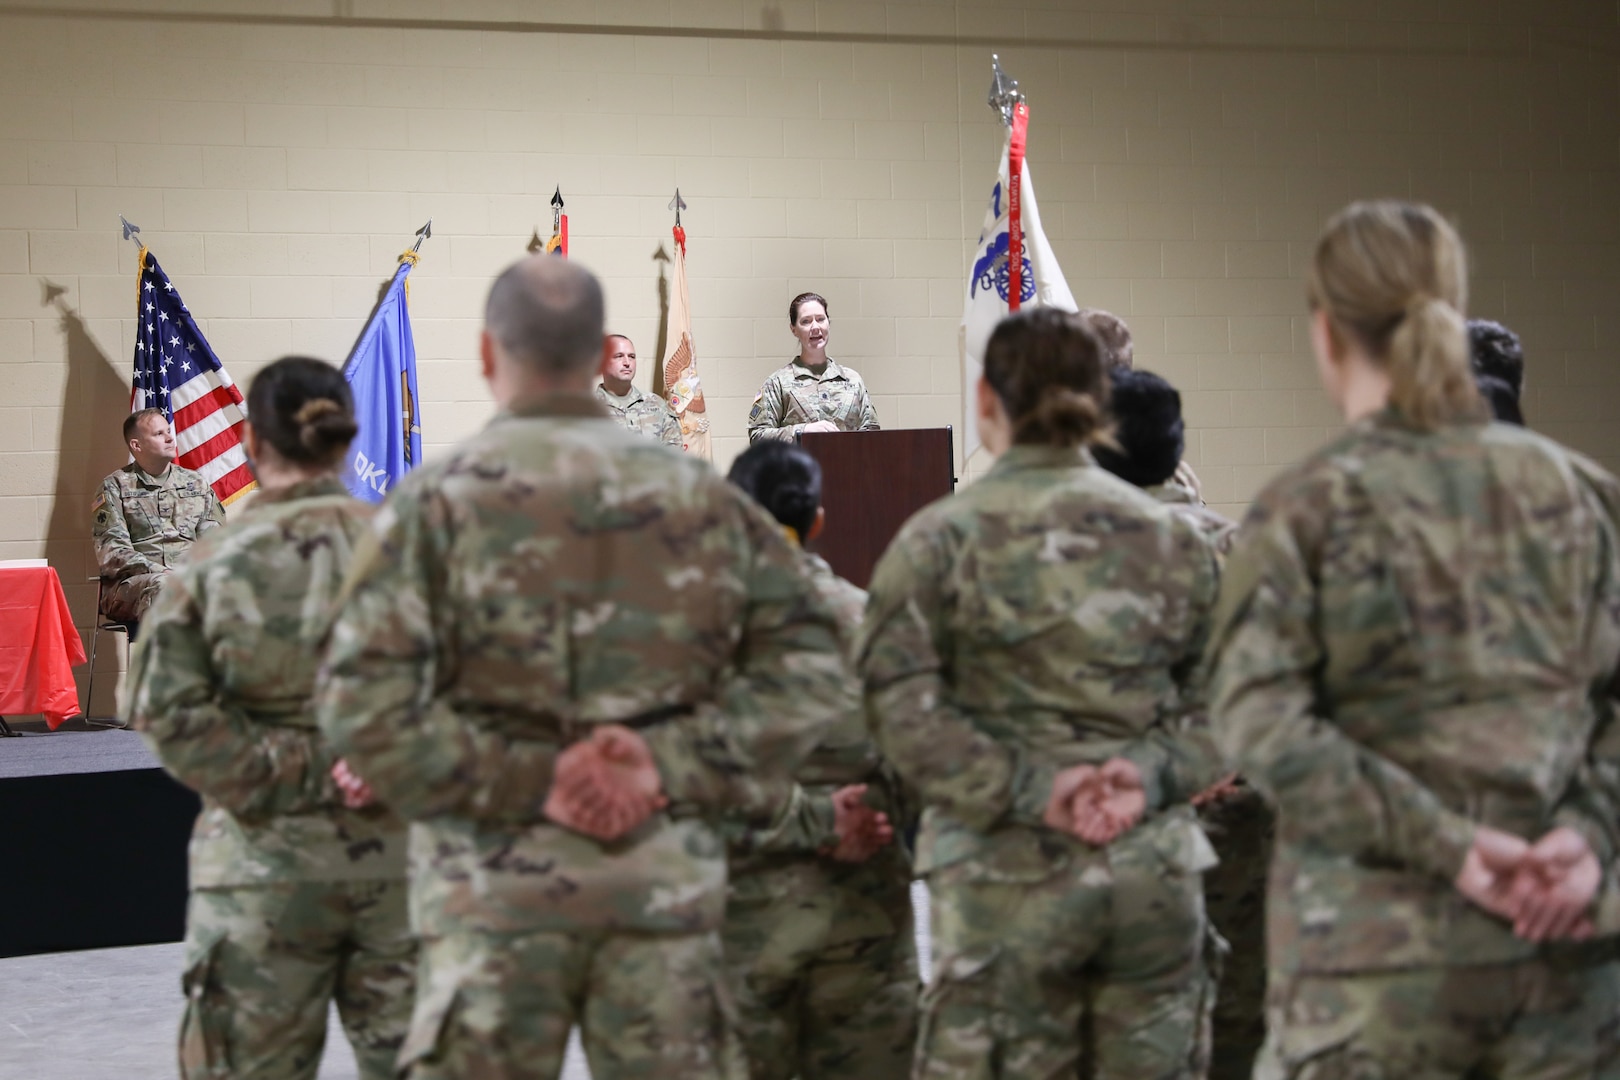 Oklahoma National Guard Lt. Col. Tonia Toben, commander of 345th Combat Sustainment Support Battalion, 90th Troop command, speaks at a ceremony awarding a Meritorious Unit Commendation to Alpha Company 777 at the Armed Forces Readiness Center, Okmulgee, Oklahoma, Feb. 5, 2022. The unit was awarded the commendation in recognition of their accomplishments during their 2016-2017 deployment to Kuwait in support of Operations Inherent Resolve, Spartan Shield, and Freedom’s Sentinel. (Oklahoma National Guard photo by Spc. Danielle Rayon)